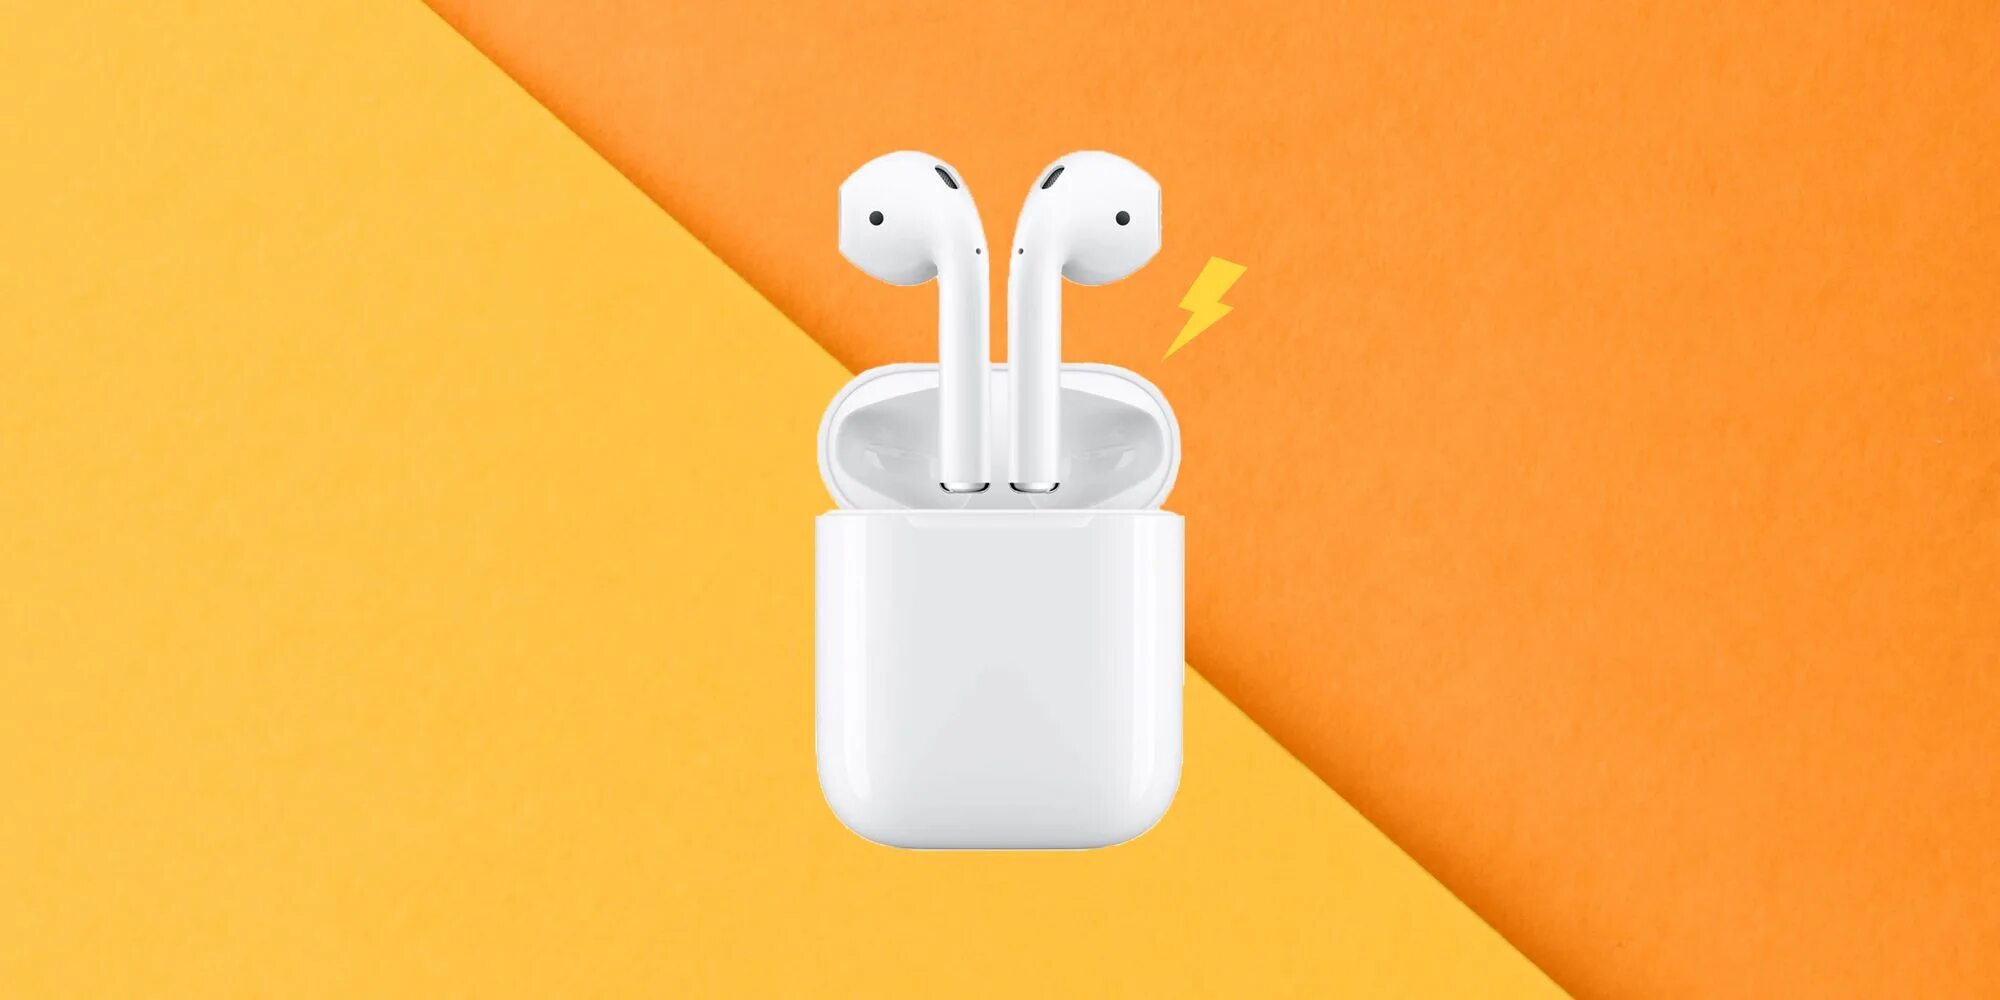 Airpods оптом. Air pods 2. Наушники AIRPODS 3. AIRPODS 2.2 Post. AIRPODS 3 на белом фоне.